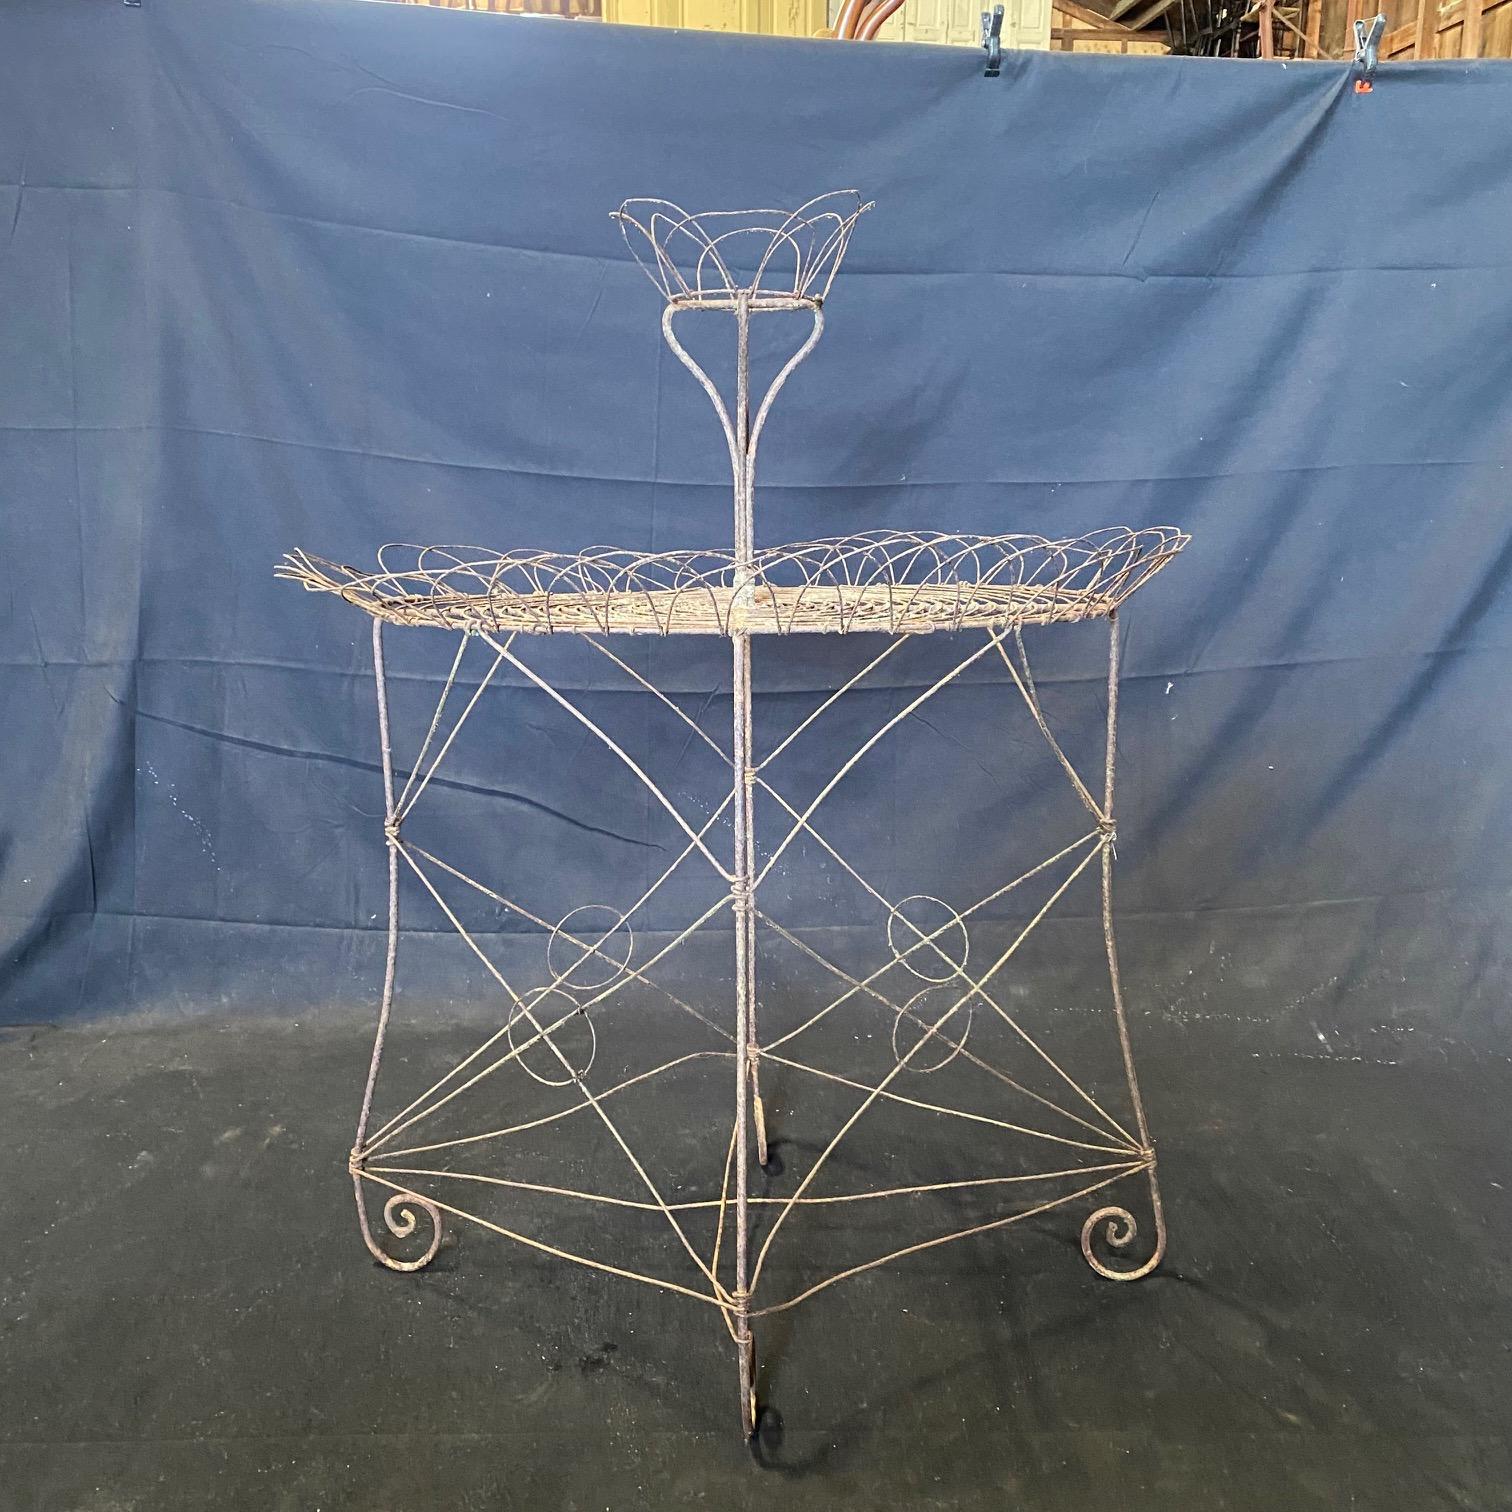 Lovely English Victorian white wire and iron two tier garden plant stand or jardiniere. The stand features an iron frame decorated with wire basket borders and 4 scrolled feet with a unique round 2 tier design, . Excellent joinery and craftsmanship